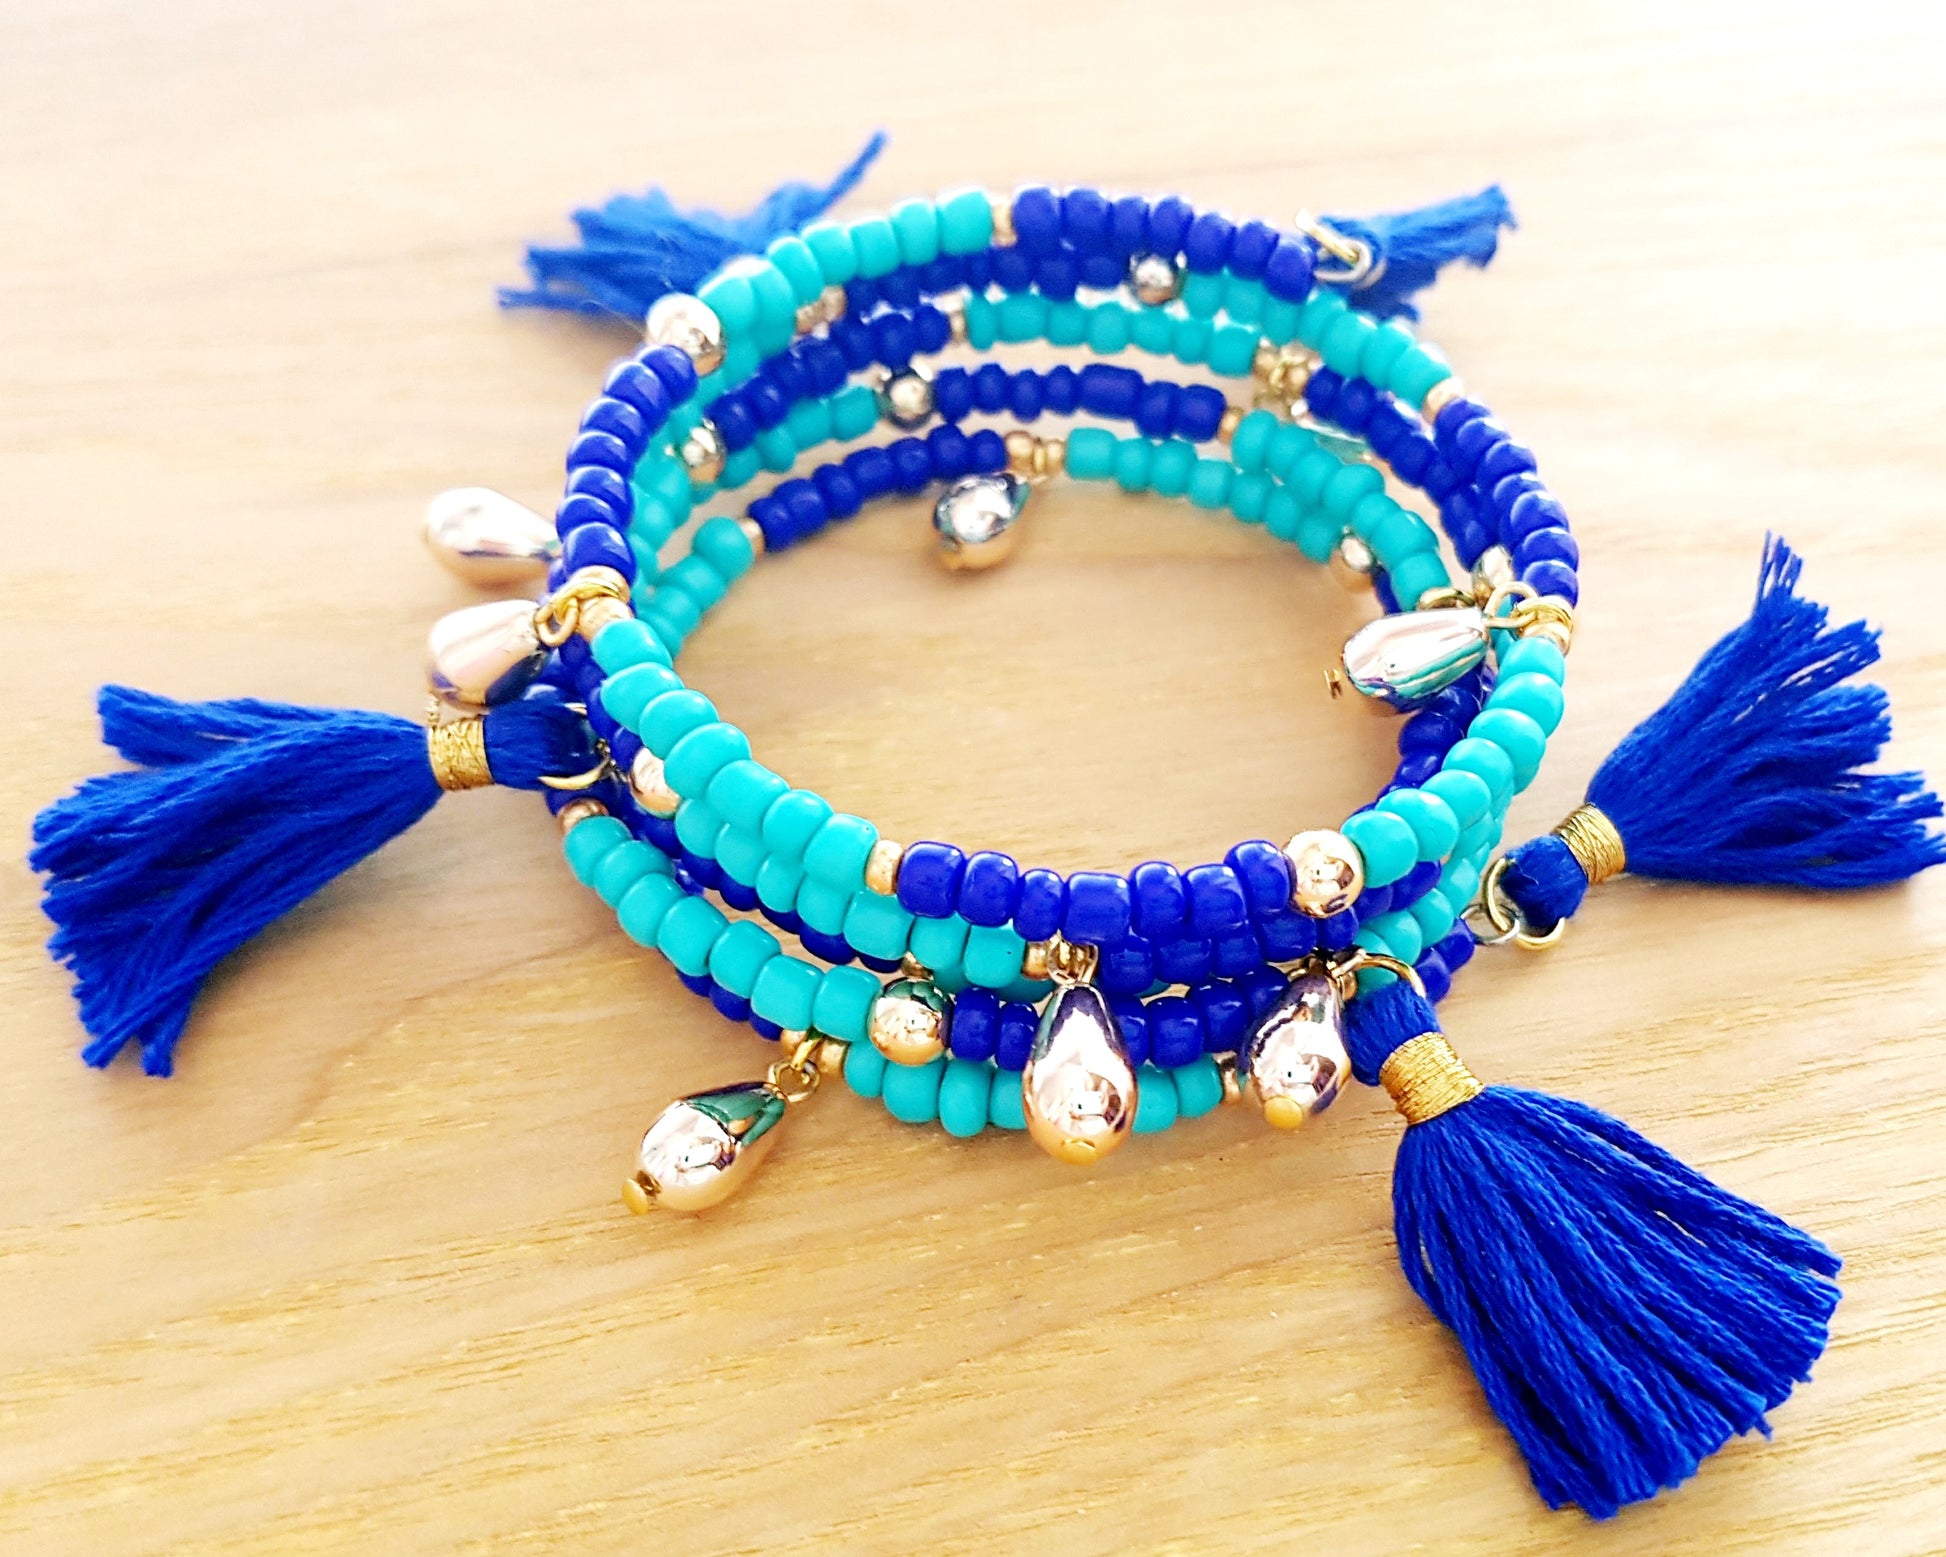 Blue Tassel Wrap Bracelet made with turquoise and cobalt blue glass beads, vintage gold tone beads and blue tassels on memory wire.